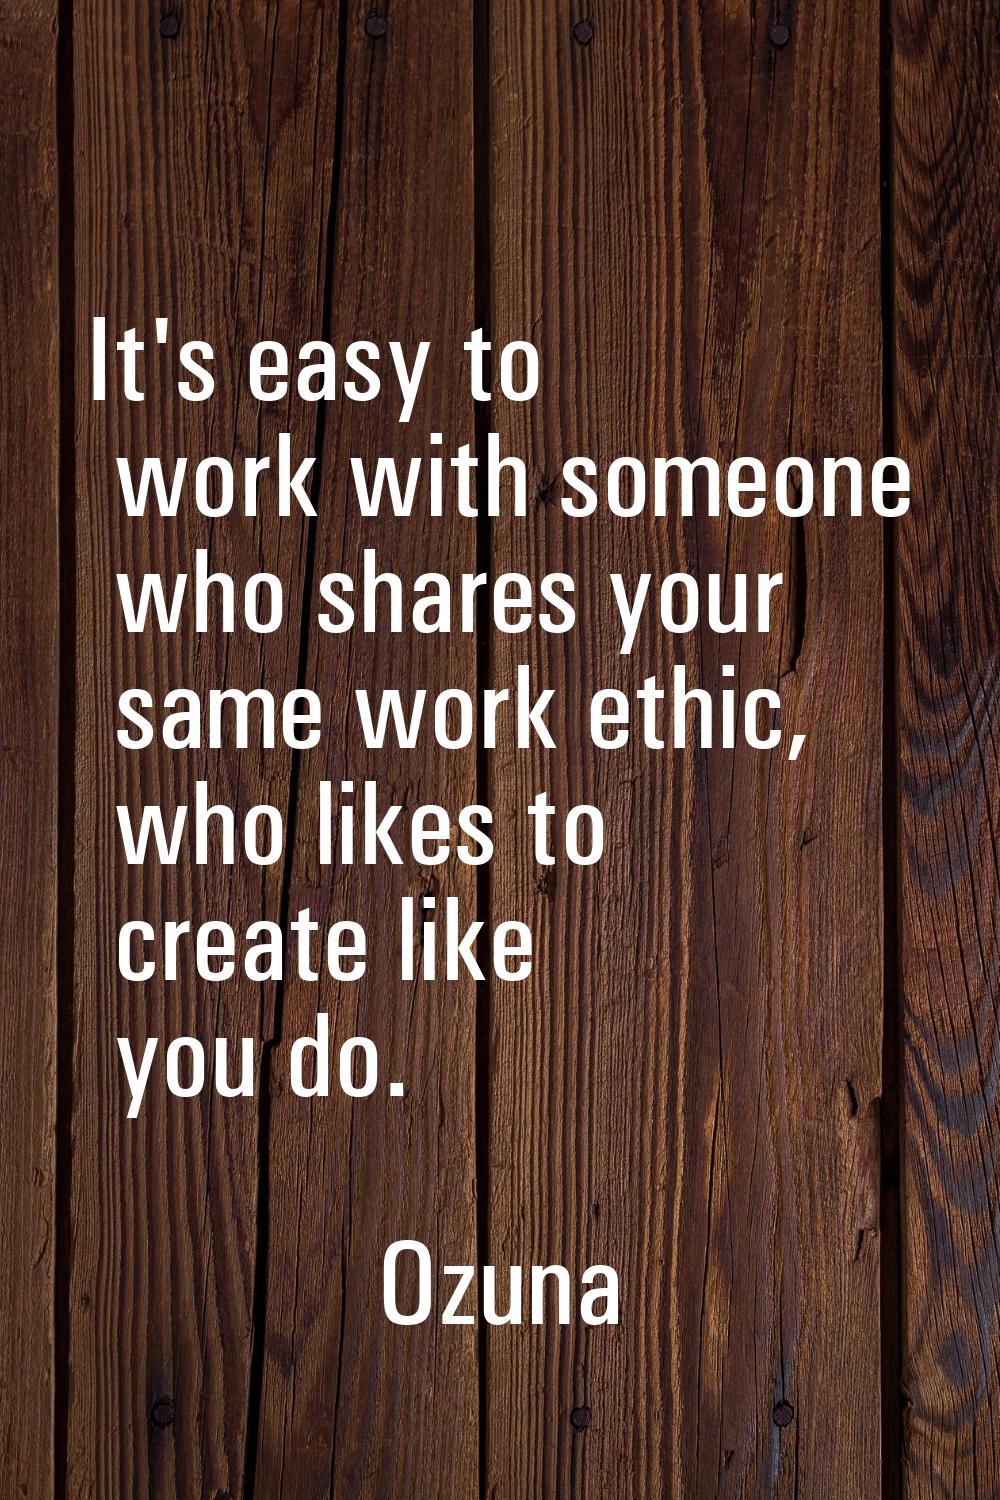 It's easy to work with someone who shares your same work ethic, who likes to create like you do.